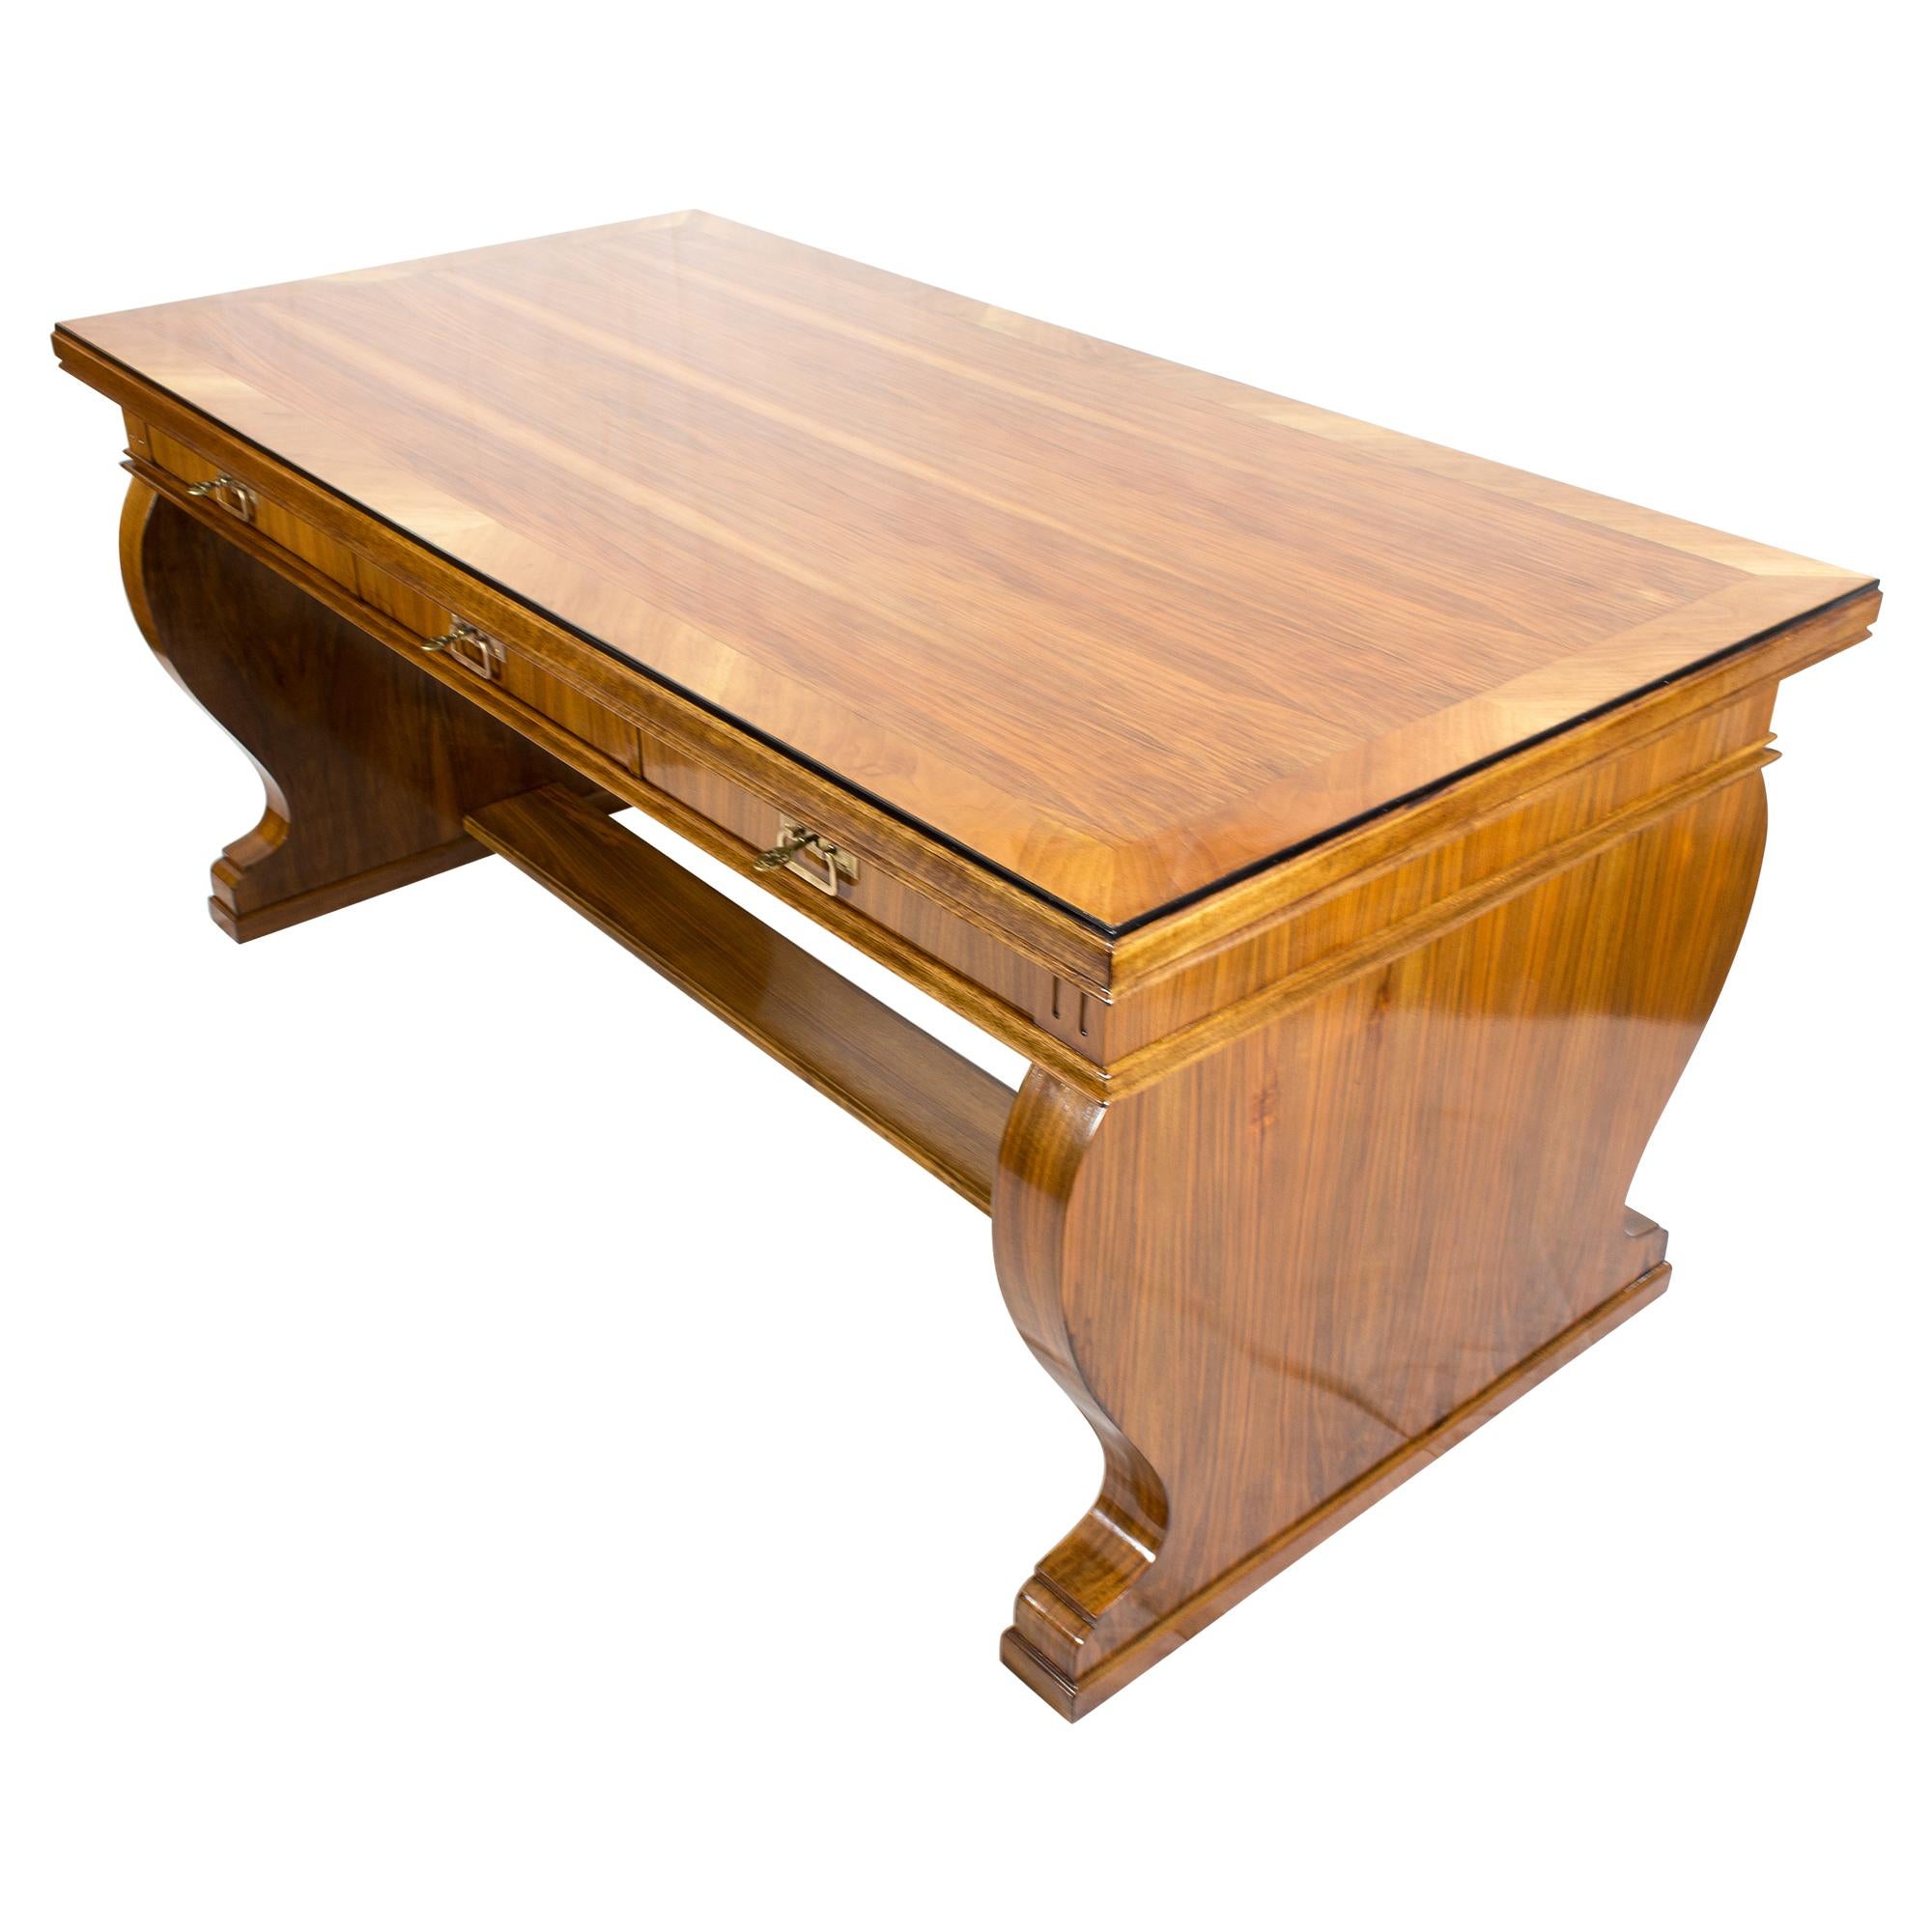 Very nice big writing desk from the period around 1915, transition from Art Nouveau to the Art Deco period. The desk was made of walnut veneer on a pinewood body. The Desk can be centered. The table has 3 drawers and on the back a plate that can be